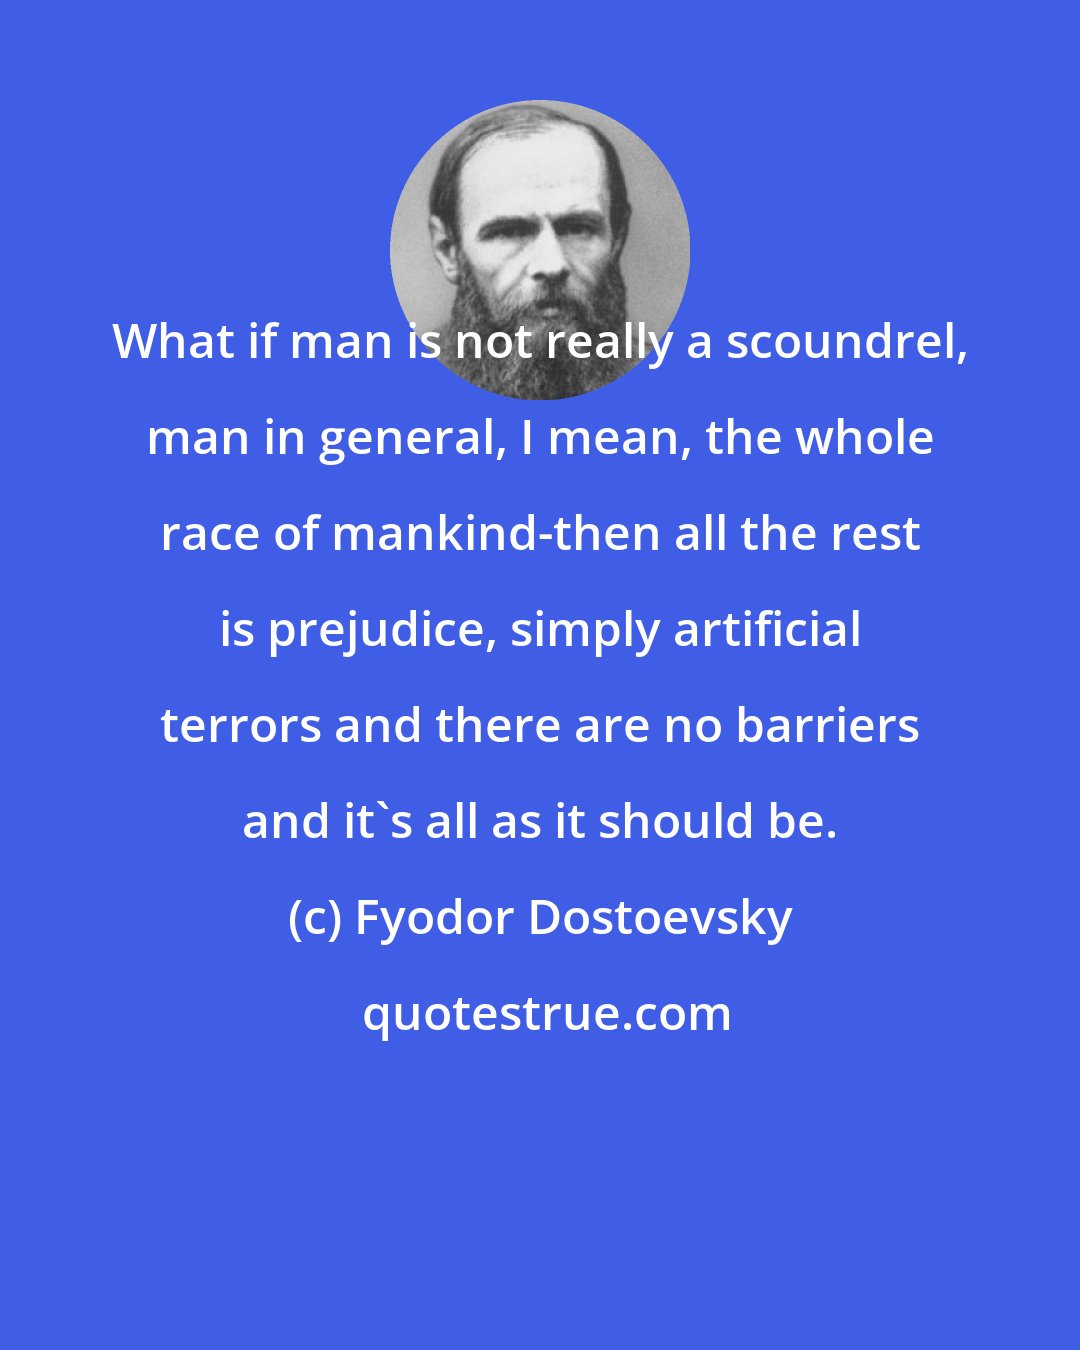 Fyodor Dostoevsky: What if man is not really a scoundrel, man in general, I mean, the whole race of mankind-then all the rest is prejudice, simply artificial terrors and there are no barriers and it's all as it should be.